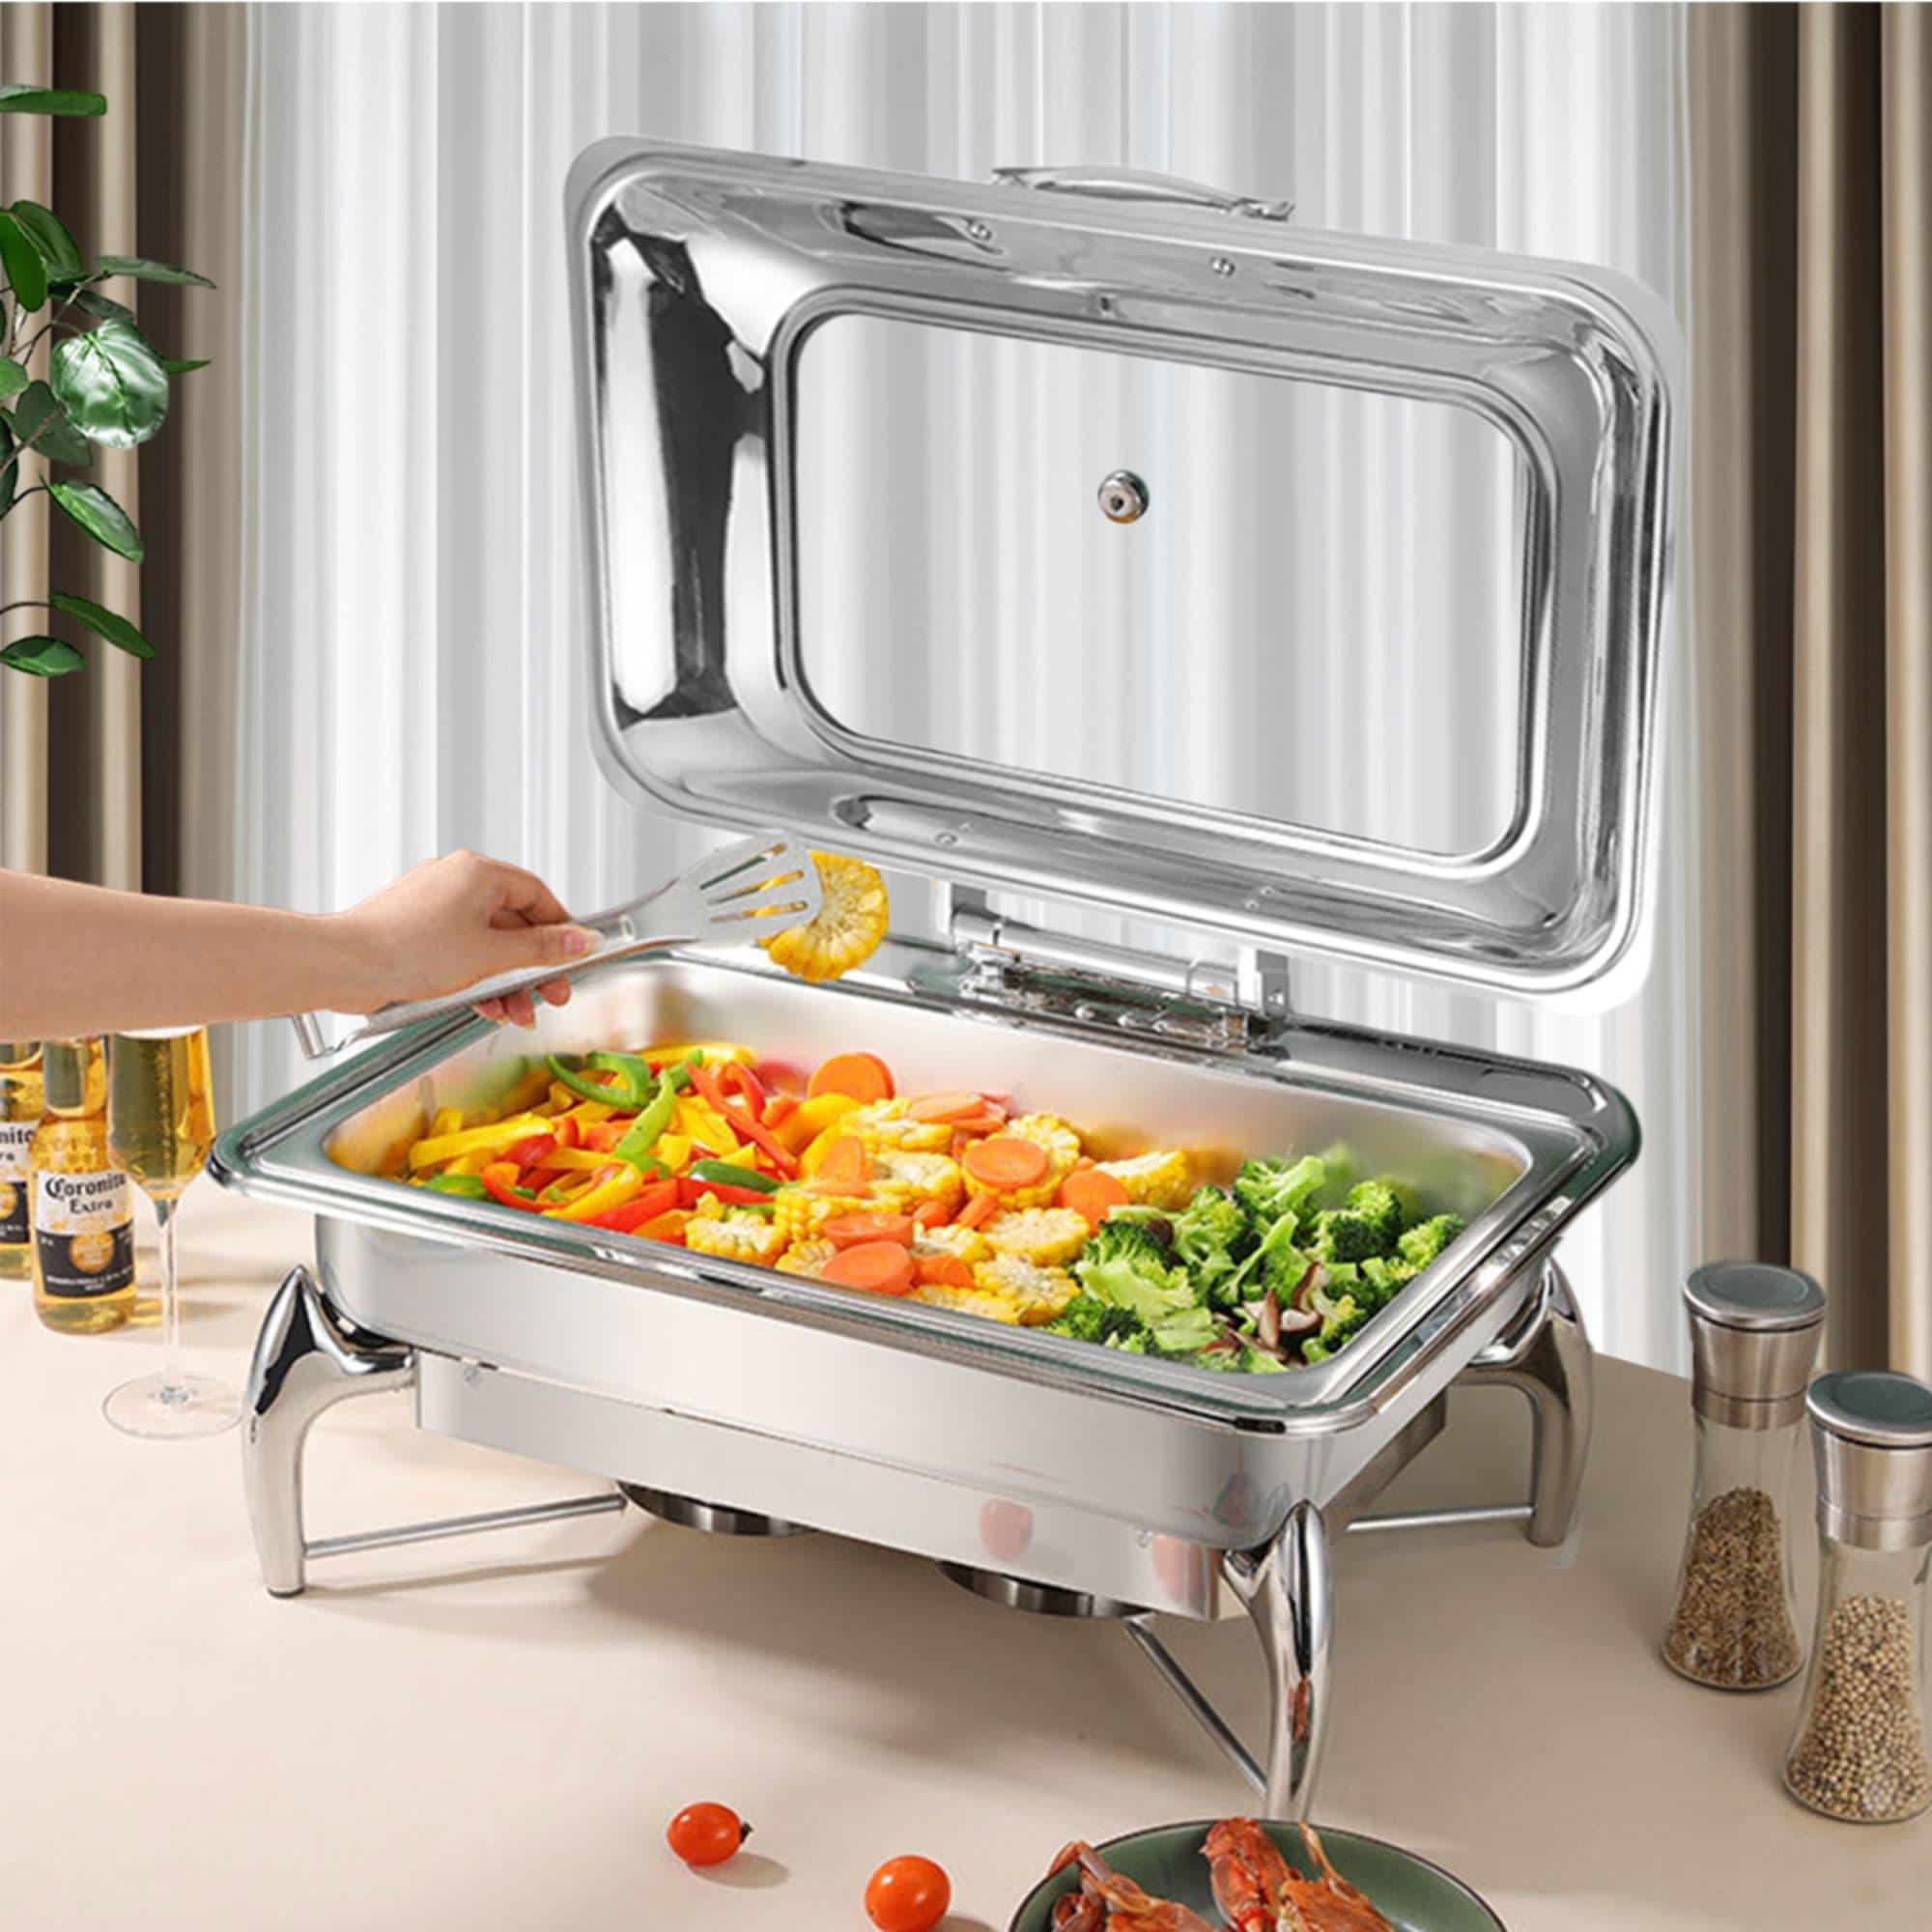 Soga Rectangular Stainless Steel Chafing Dish with Top Lid Image 6